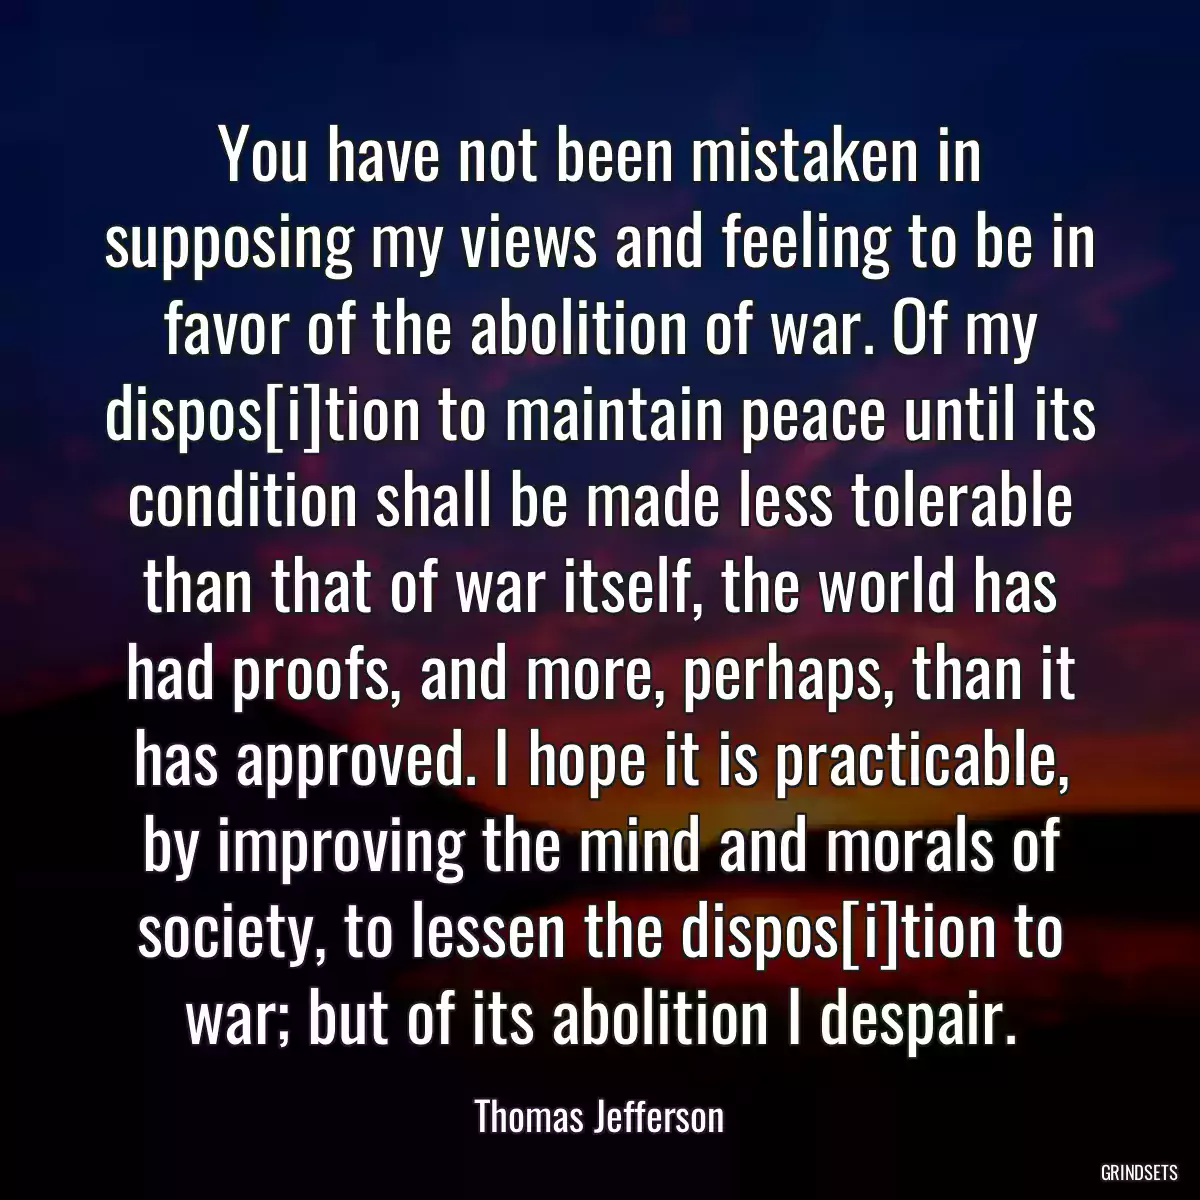 You have not been mistaken in supposing my views and feeling to be in favor of the abolition of war. Of my dispos[i]tion to maintain peace until its condition shall be made less tolerable than that of war itself, the world has had proofs, and more, perhaps, than it has approved. I hope it is practicable, by improving the mind and morals of society, to lessen the dispos[i]tion to war; but of its abolition I despair.